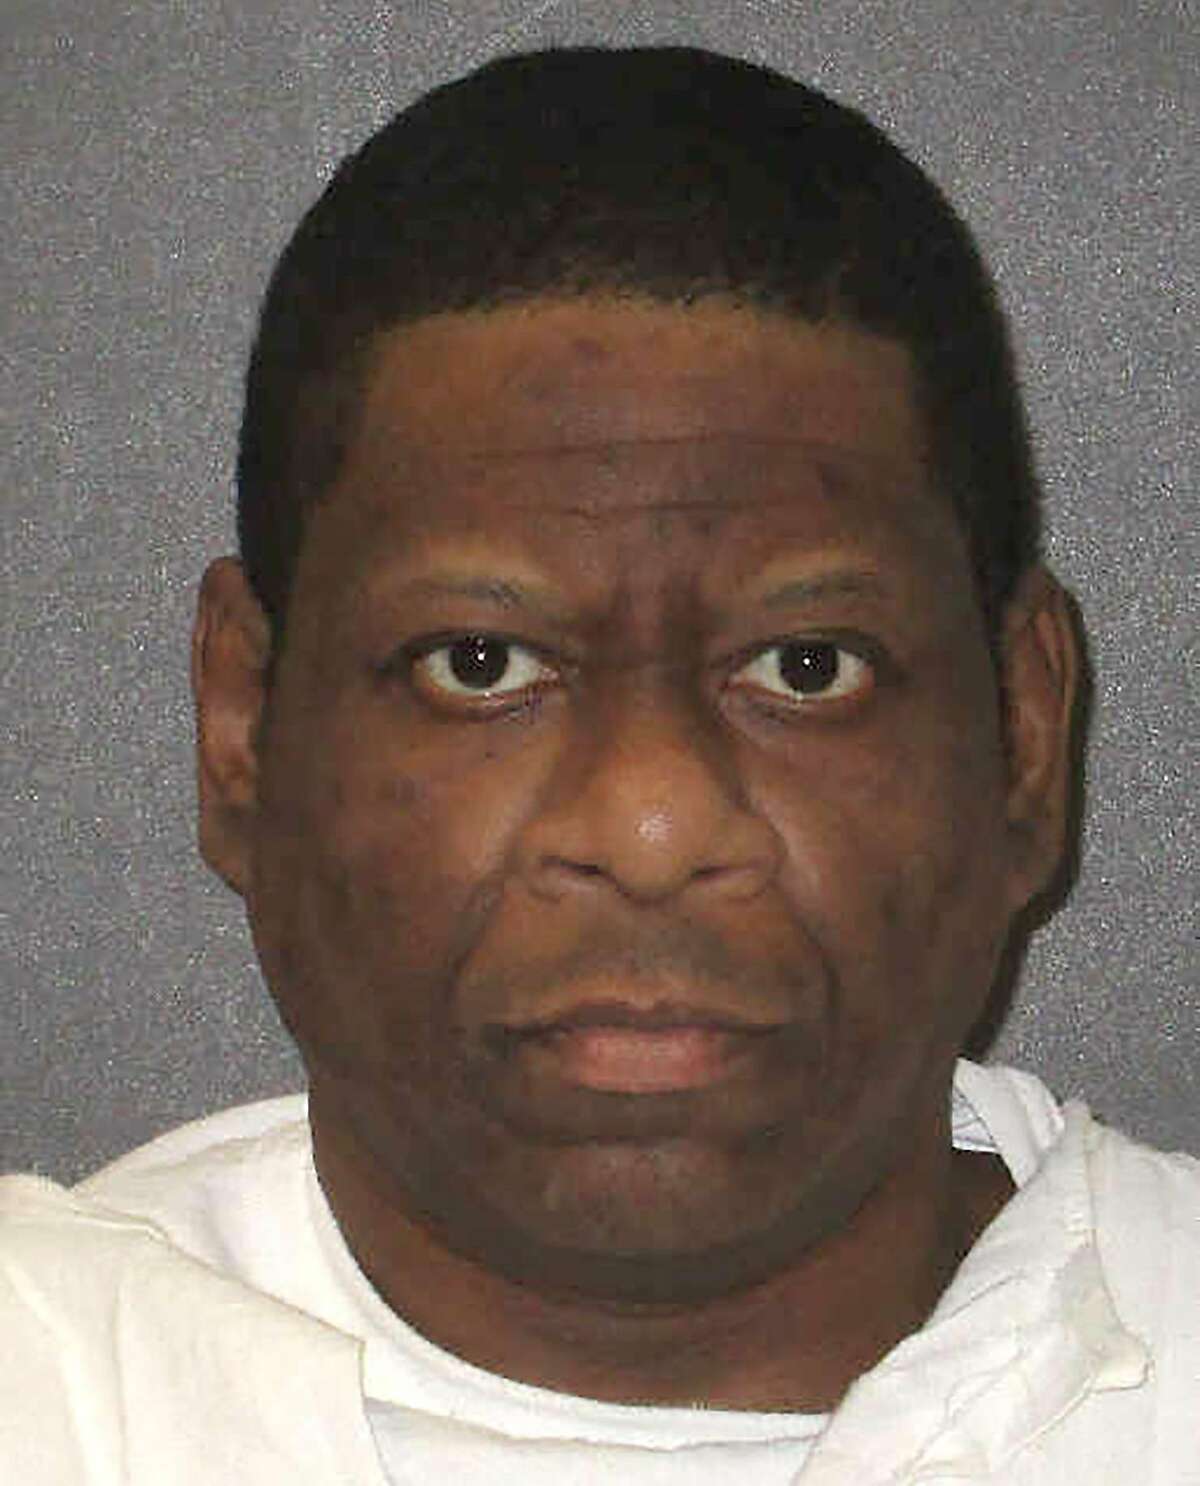 Rodney Reed, a black man, was convicted in the brutal raping and killing of 19-year-old Stacey Stites, a white woman, in April 1996. He is scheduled to die by lethal injection in Texas on Wednesday, Nov. 20.